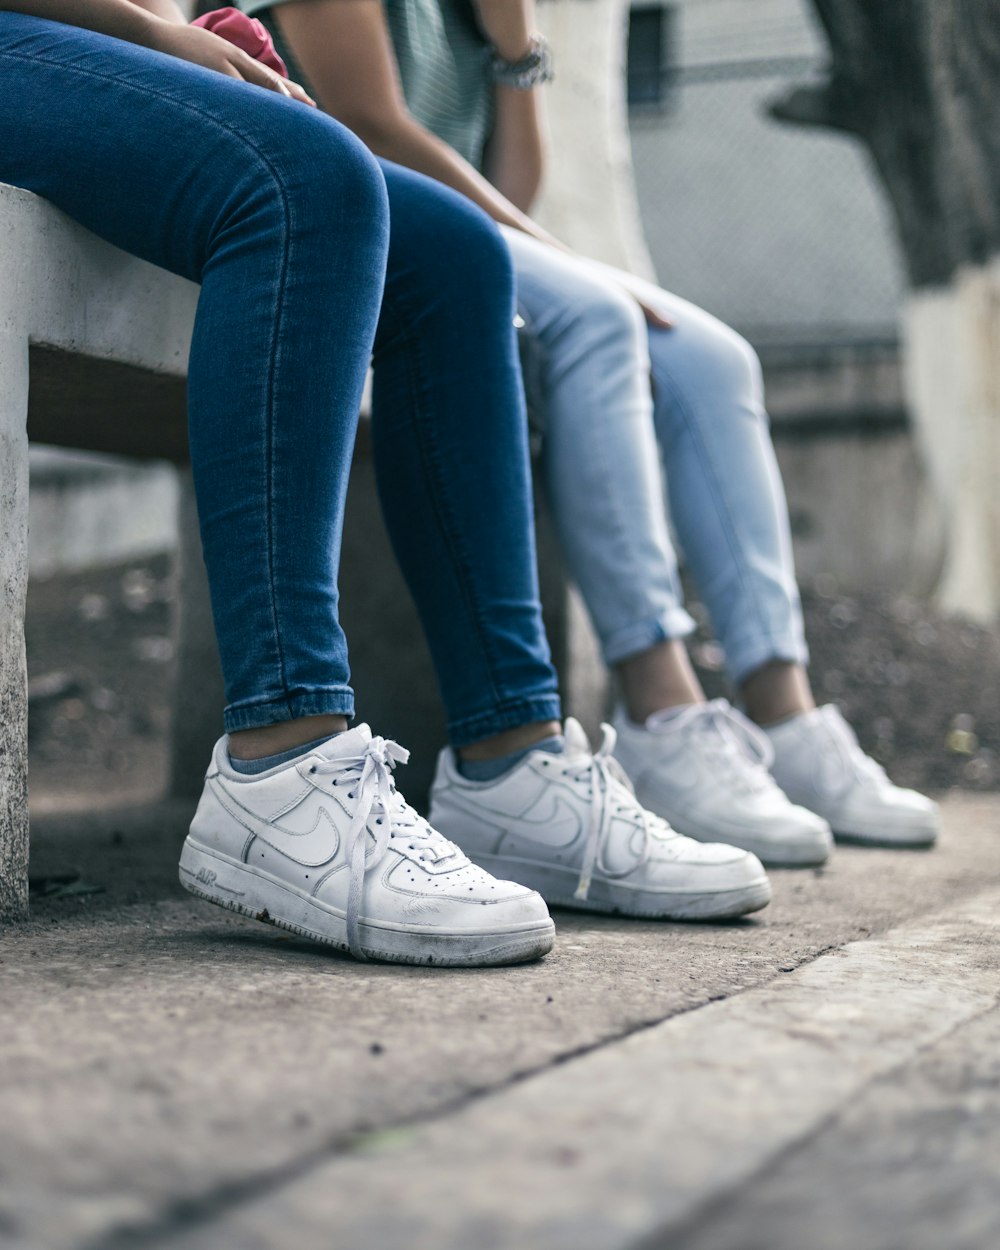 Person in blue denim jeans and white sneakers photo – Free #air force 1  Image on Unsplash